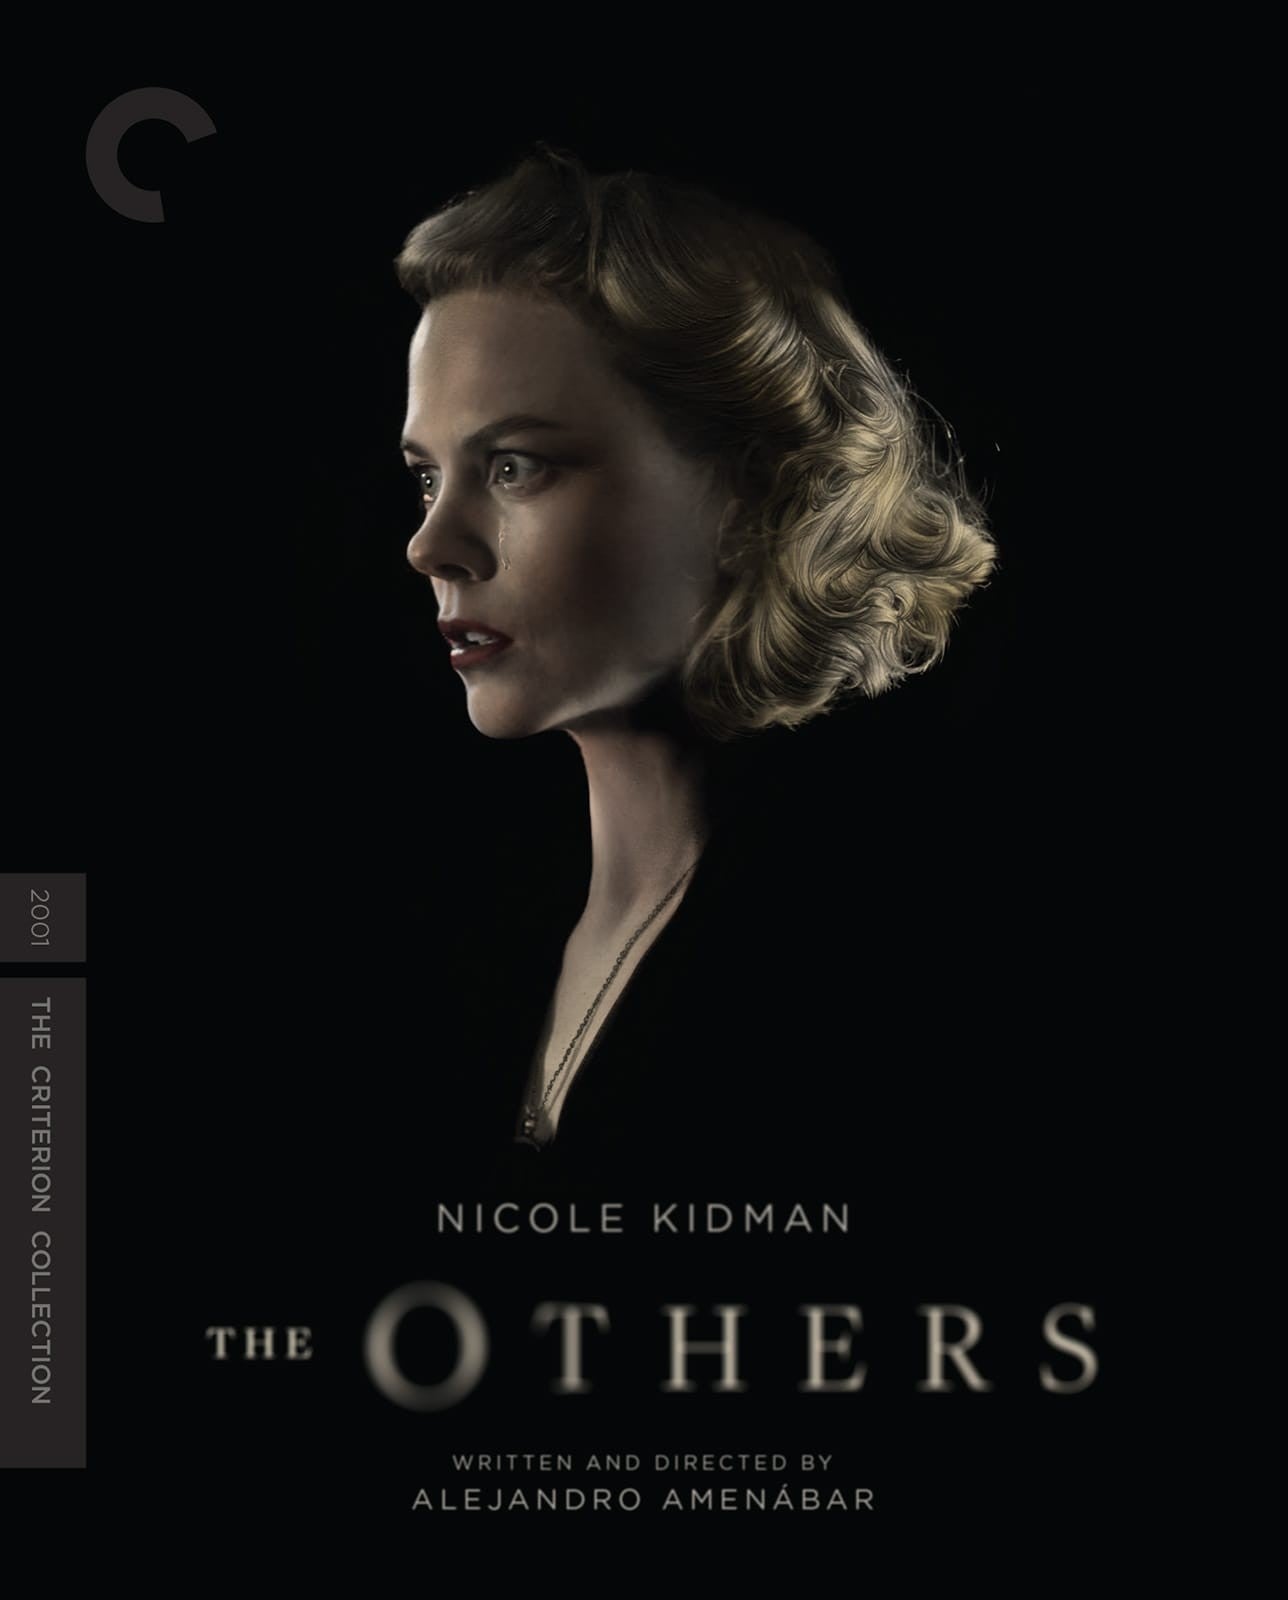 The Others 4K UHD + Blu-ray (Criterion)